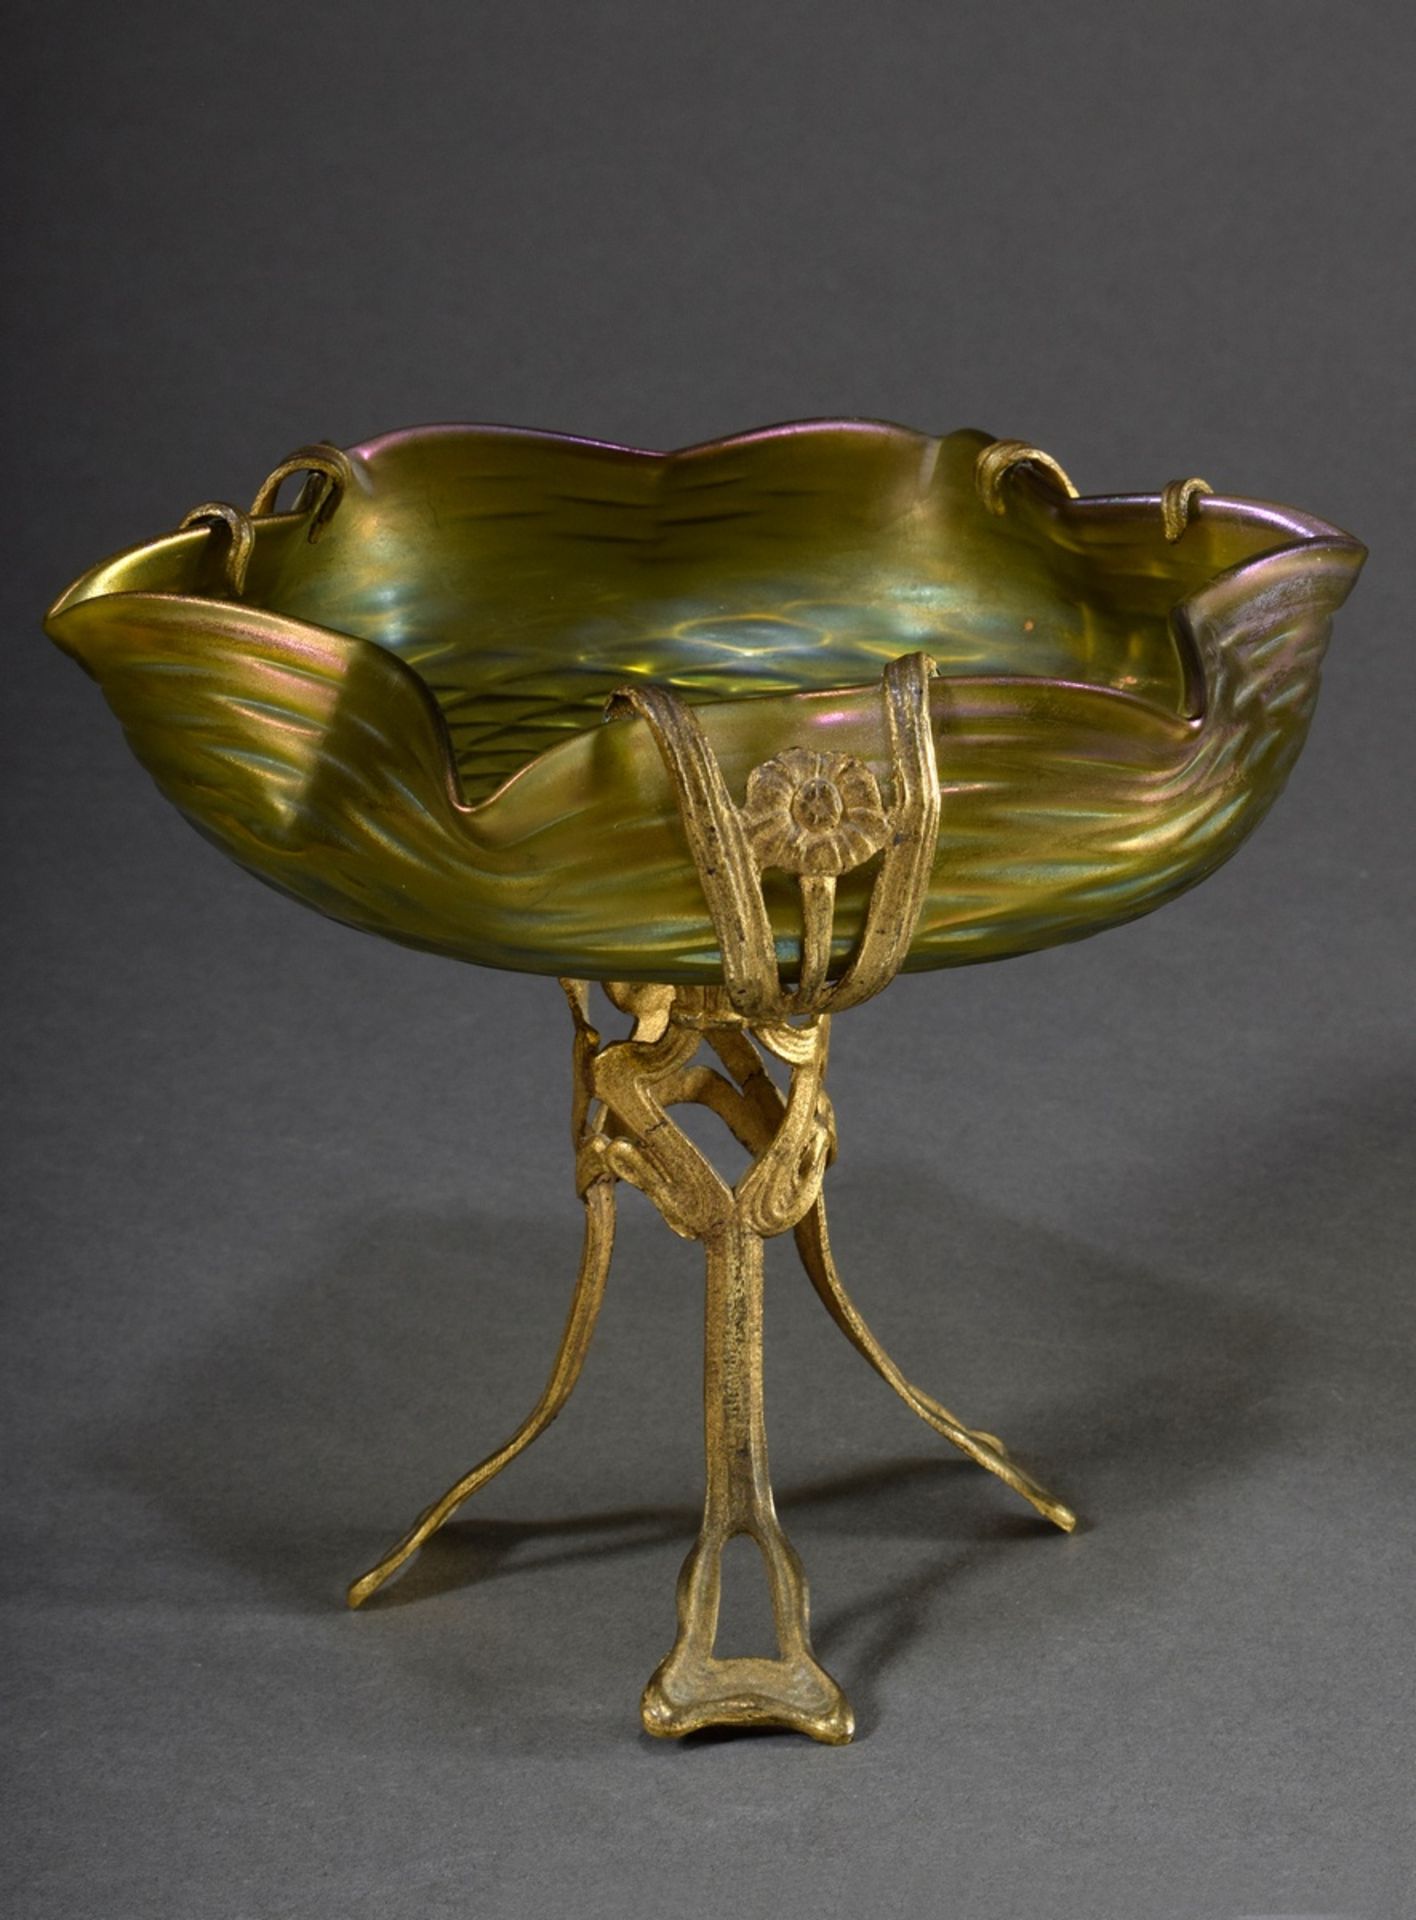 Art nouveau top with fire-gilt zinc cast frame and light green to yellowish iridescent glass bowl i